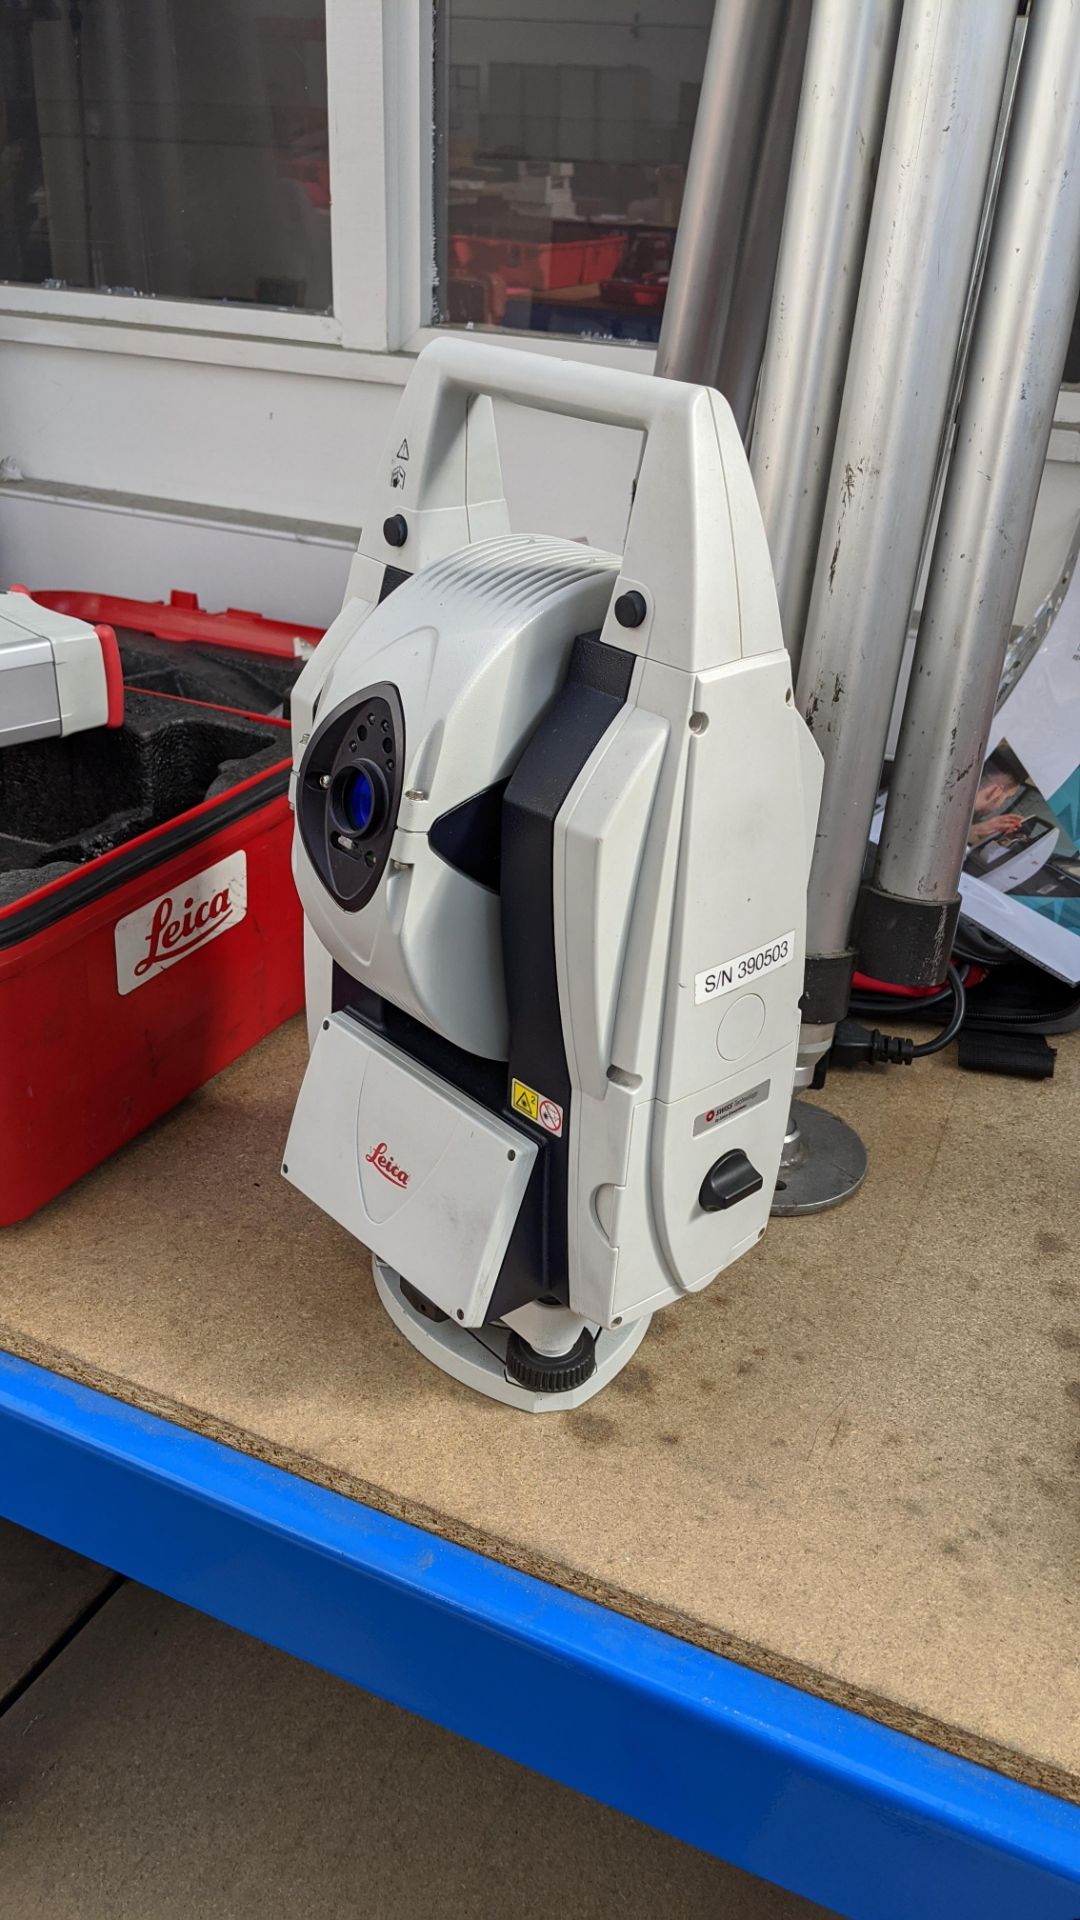 Leica Absolute laser tracker, model AT401, serial no. 39503. Next calibration date due on 01.11. - Image 9 of 21